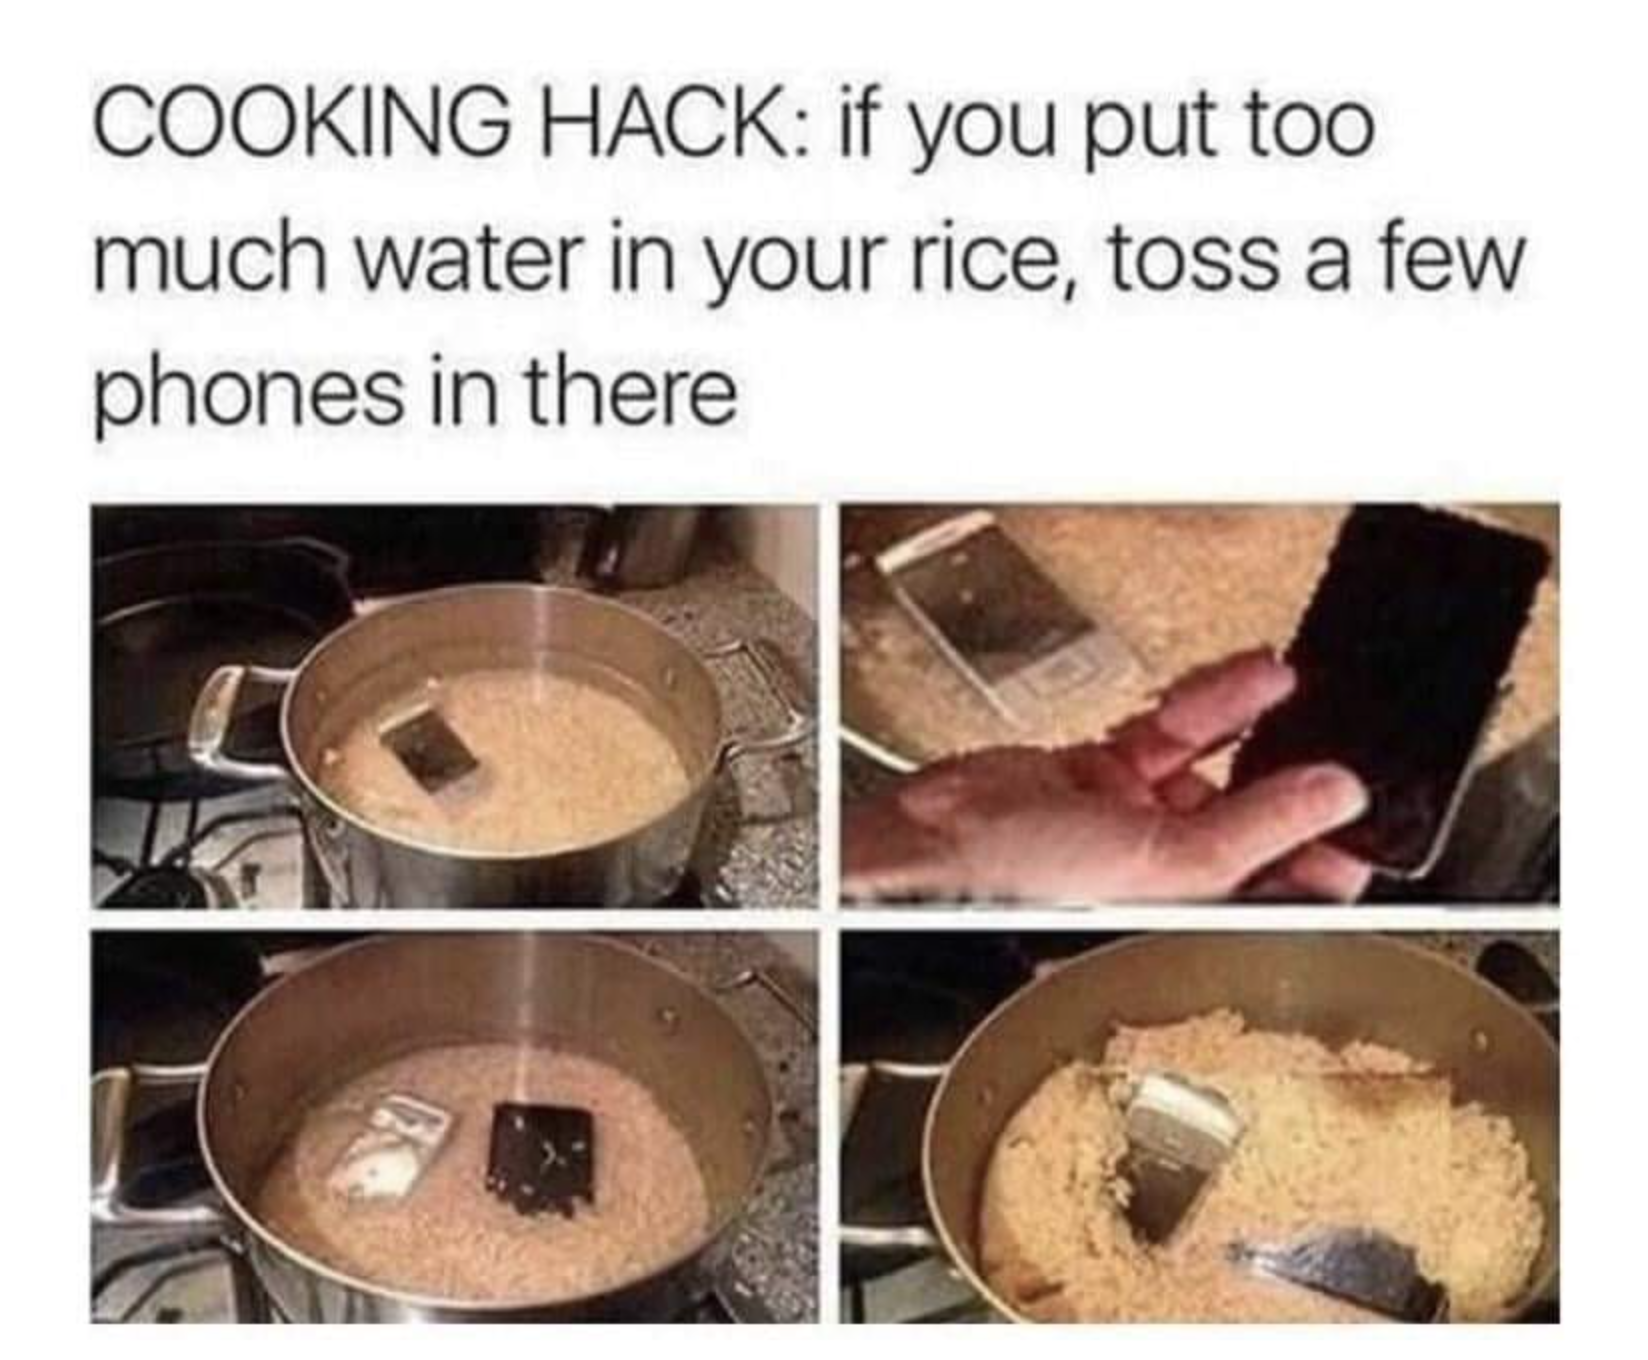 too much water in rice - Cooking Hack if you put too much water in your rice, toss a few phones in there